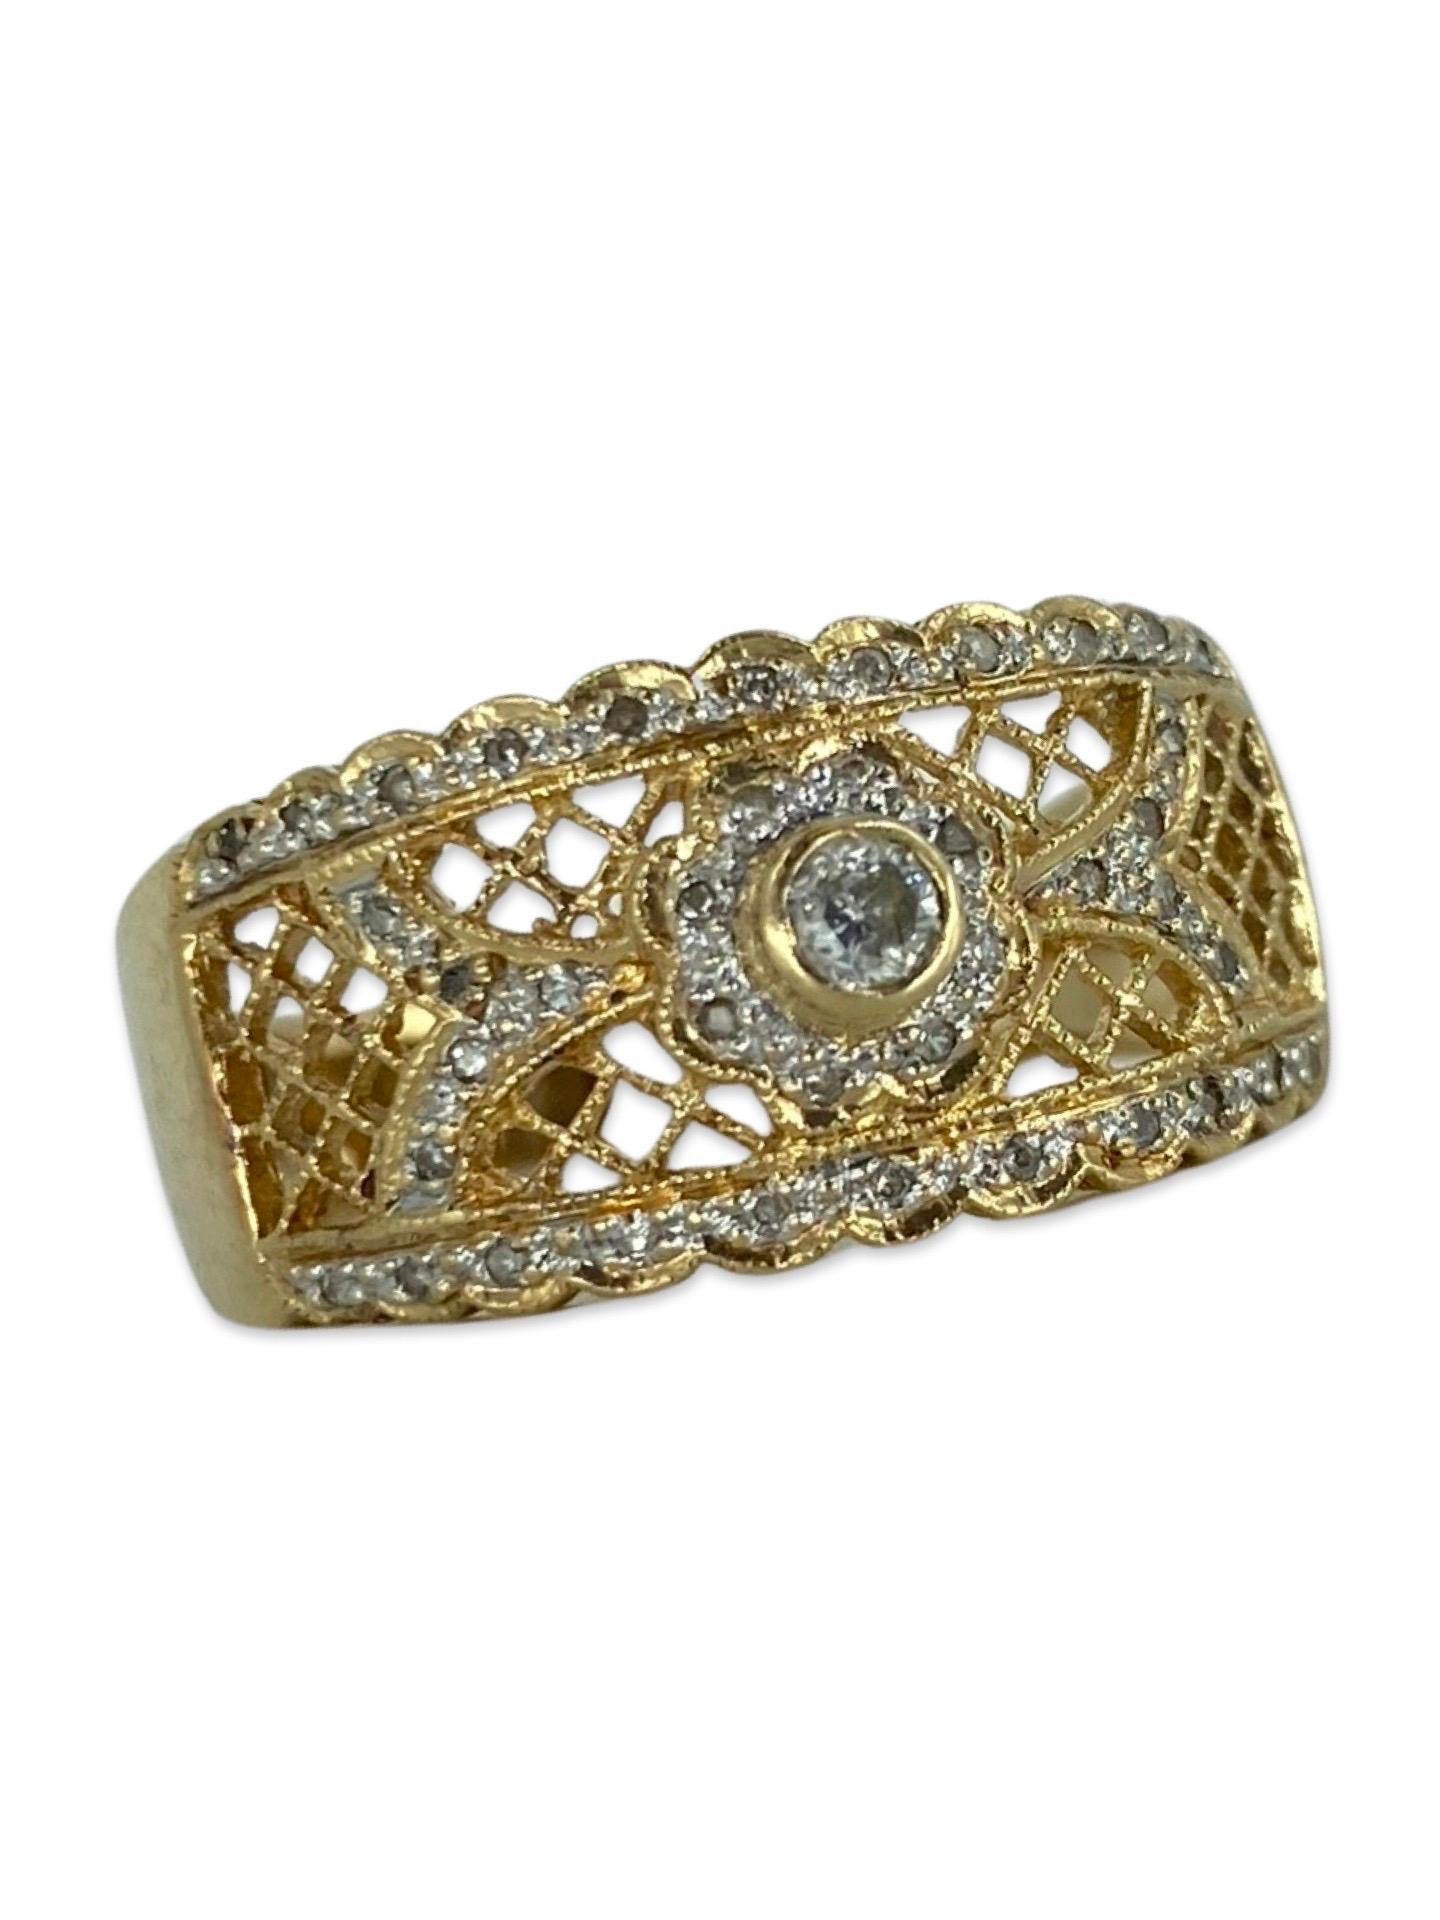 Round Cut Vintage 0.50 Carat Diamonds Wide Band Ring 14k Gold  For Sale